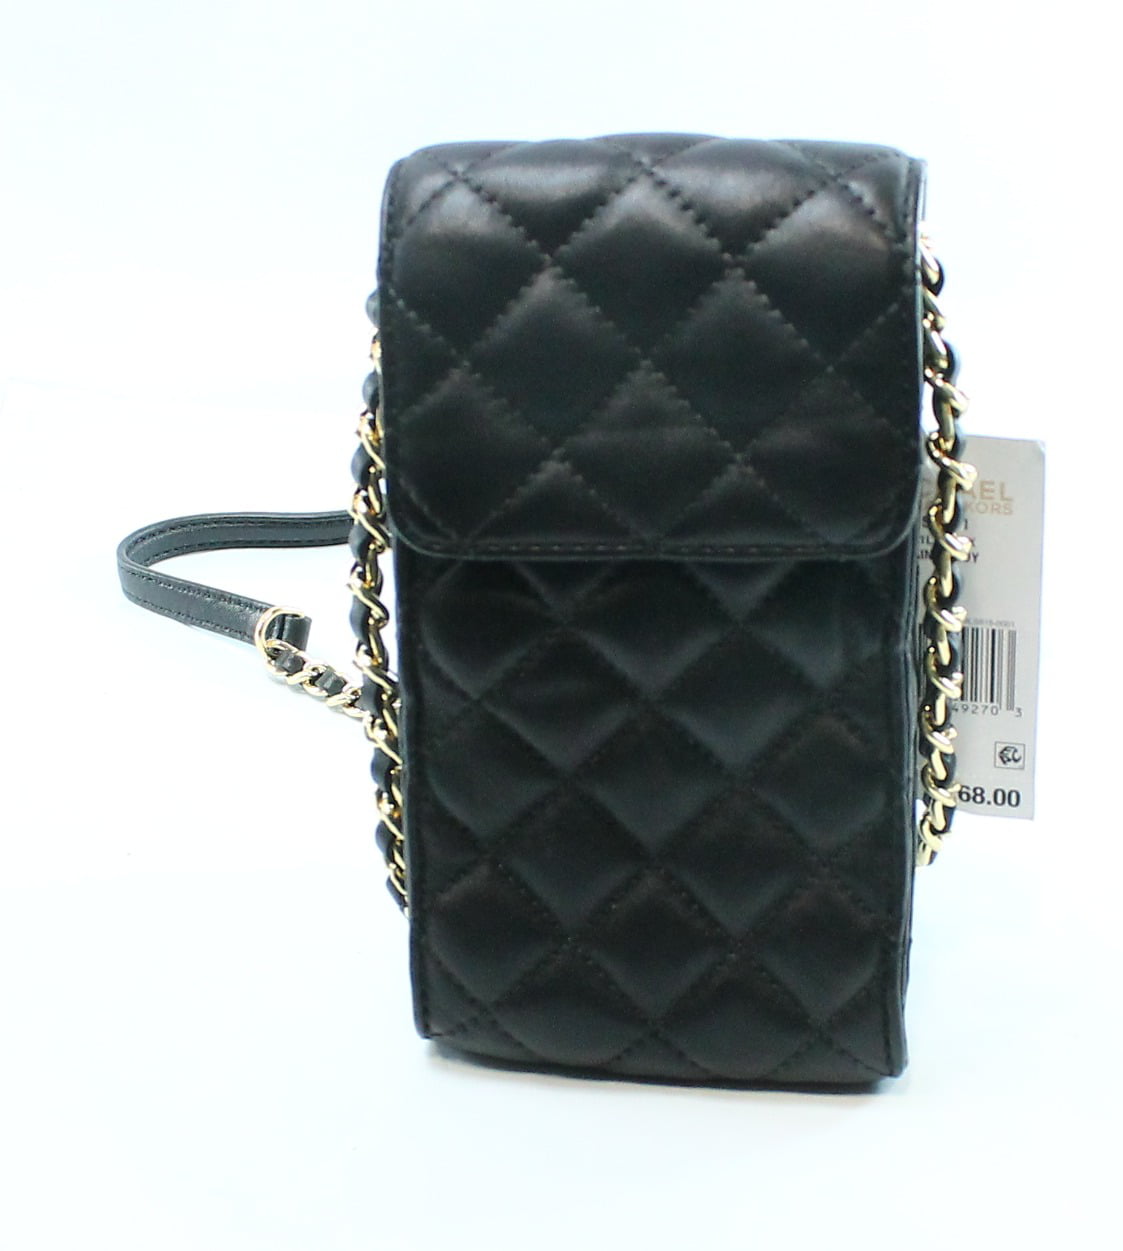 Michael Kors NEW Black Quilted Sloan Phone Chain Crossbody Bag Purse - 0